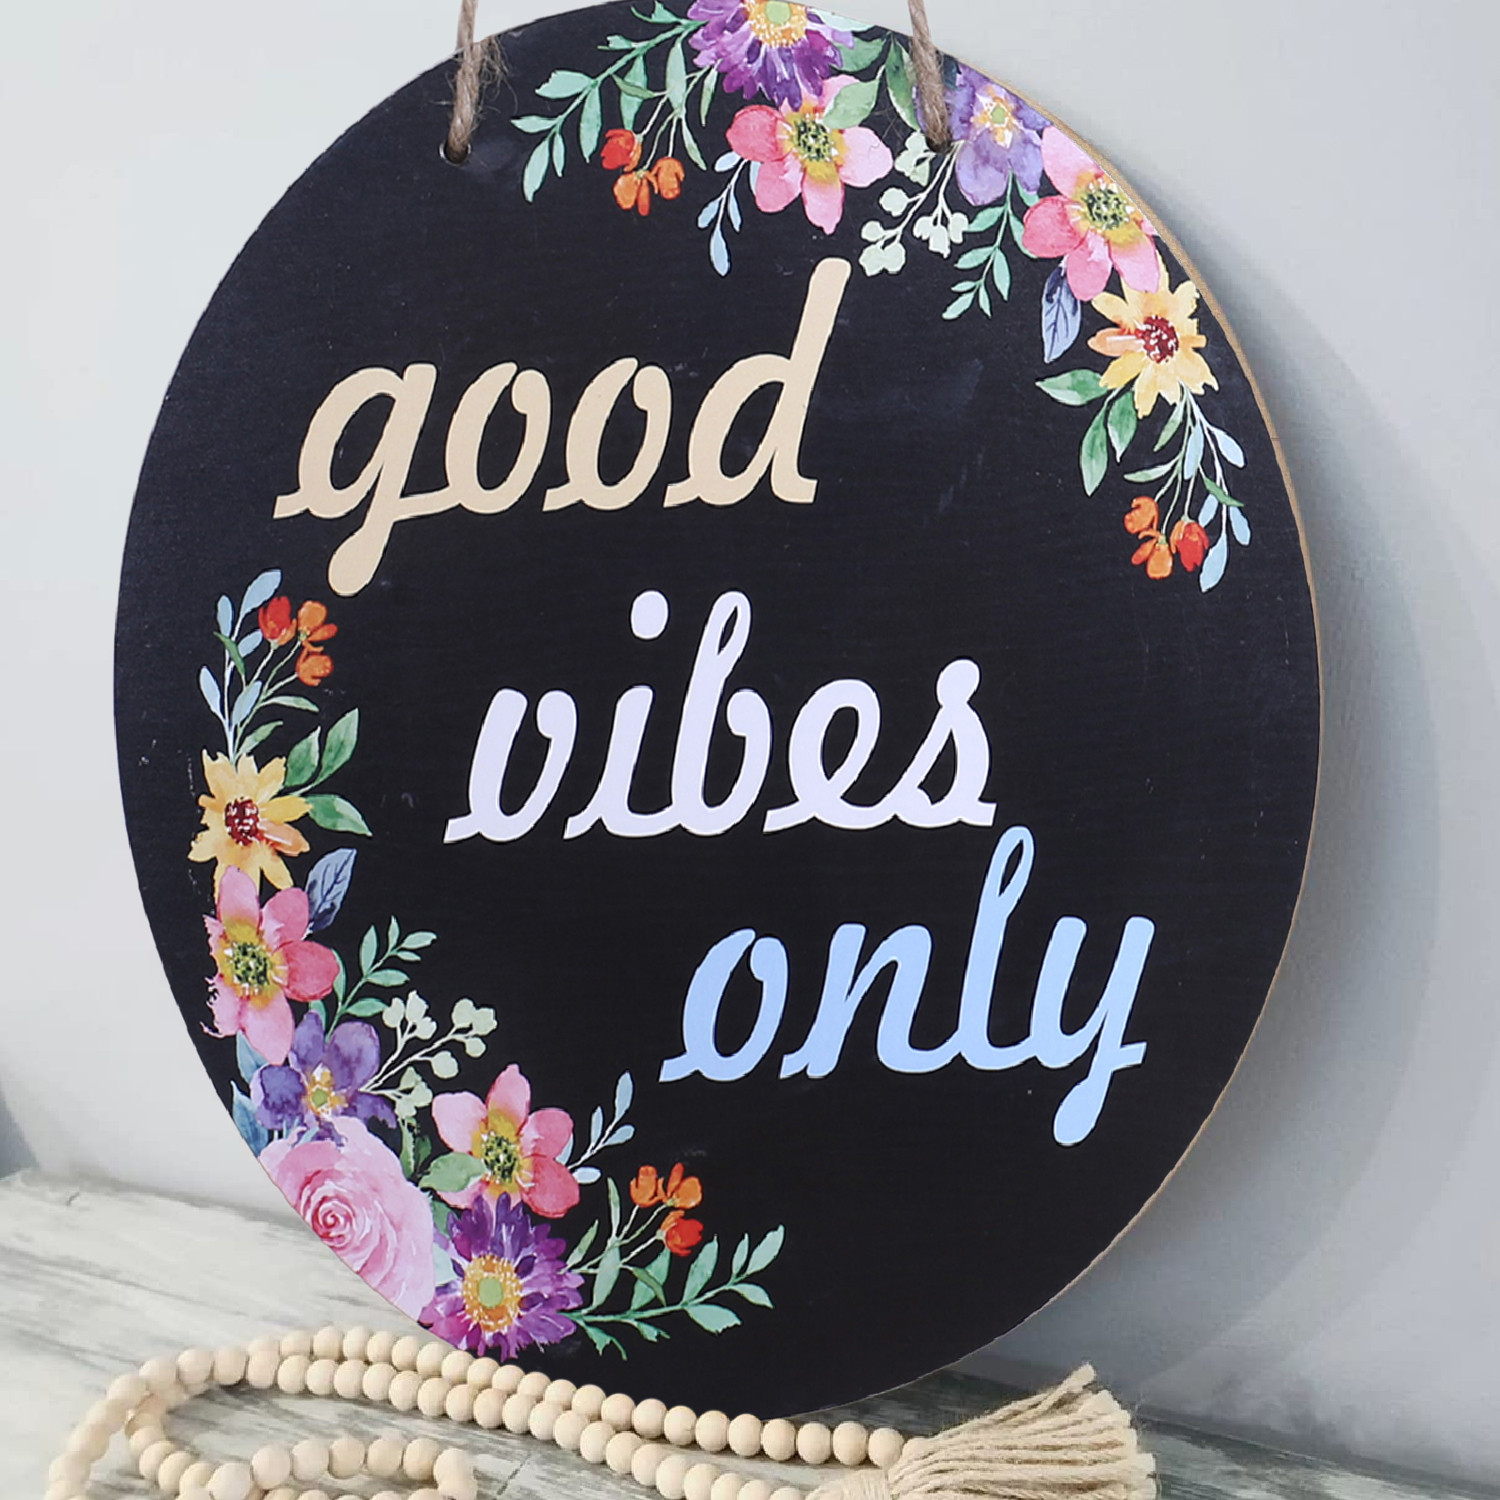 Kuber Industries Wall Hanging Quotes|Mdf Wooden Round Shaped Floral Print Plates For Kids Bedroom,Hall Entrance,Office (Black)